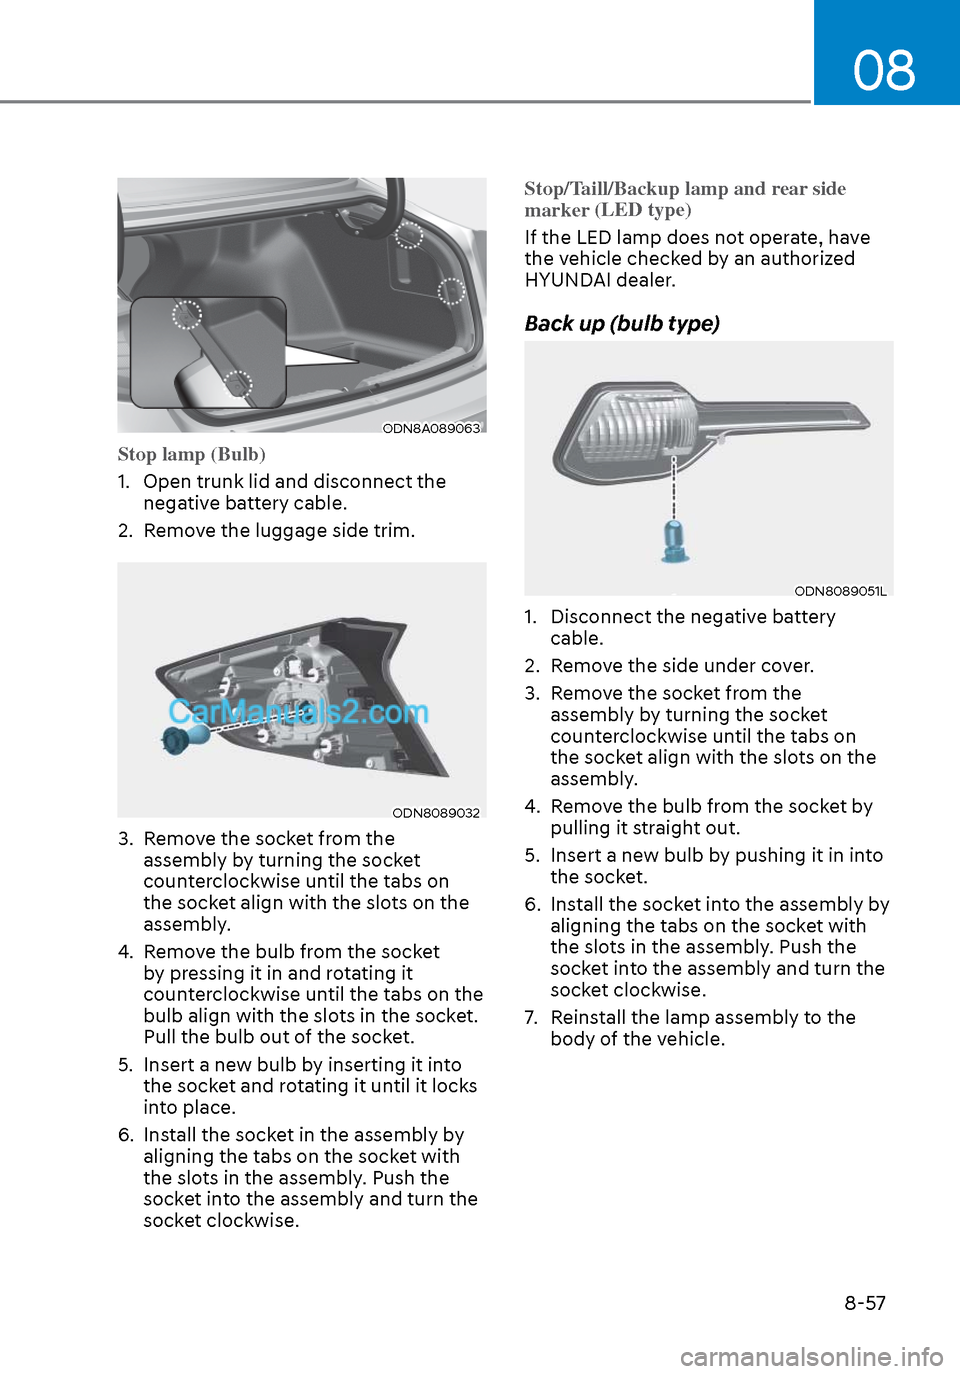 Hyundai Sonata 2020 User Guide 08
8-57
ODN8A089063ODN8A089063
Stop lamp (Bulb)
1.  Open trunk lid and disconnect the nega
 tive battery cable.
2.  Remove the luggage side trim.
ODN8089032ODN8089032
3.  Remove the socket from the  a